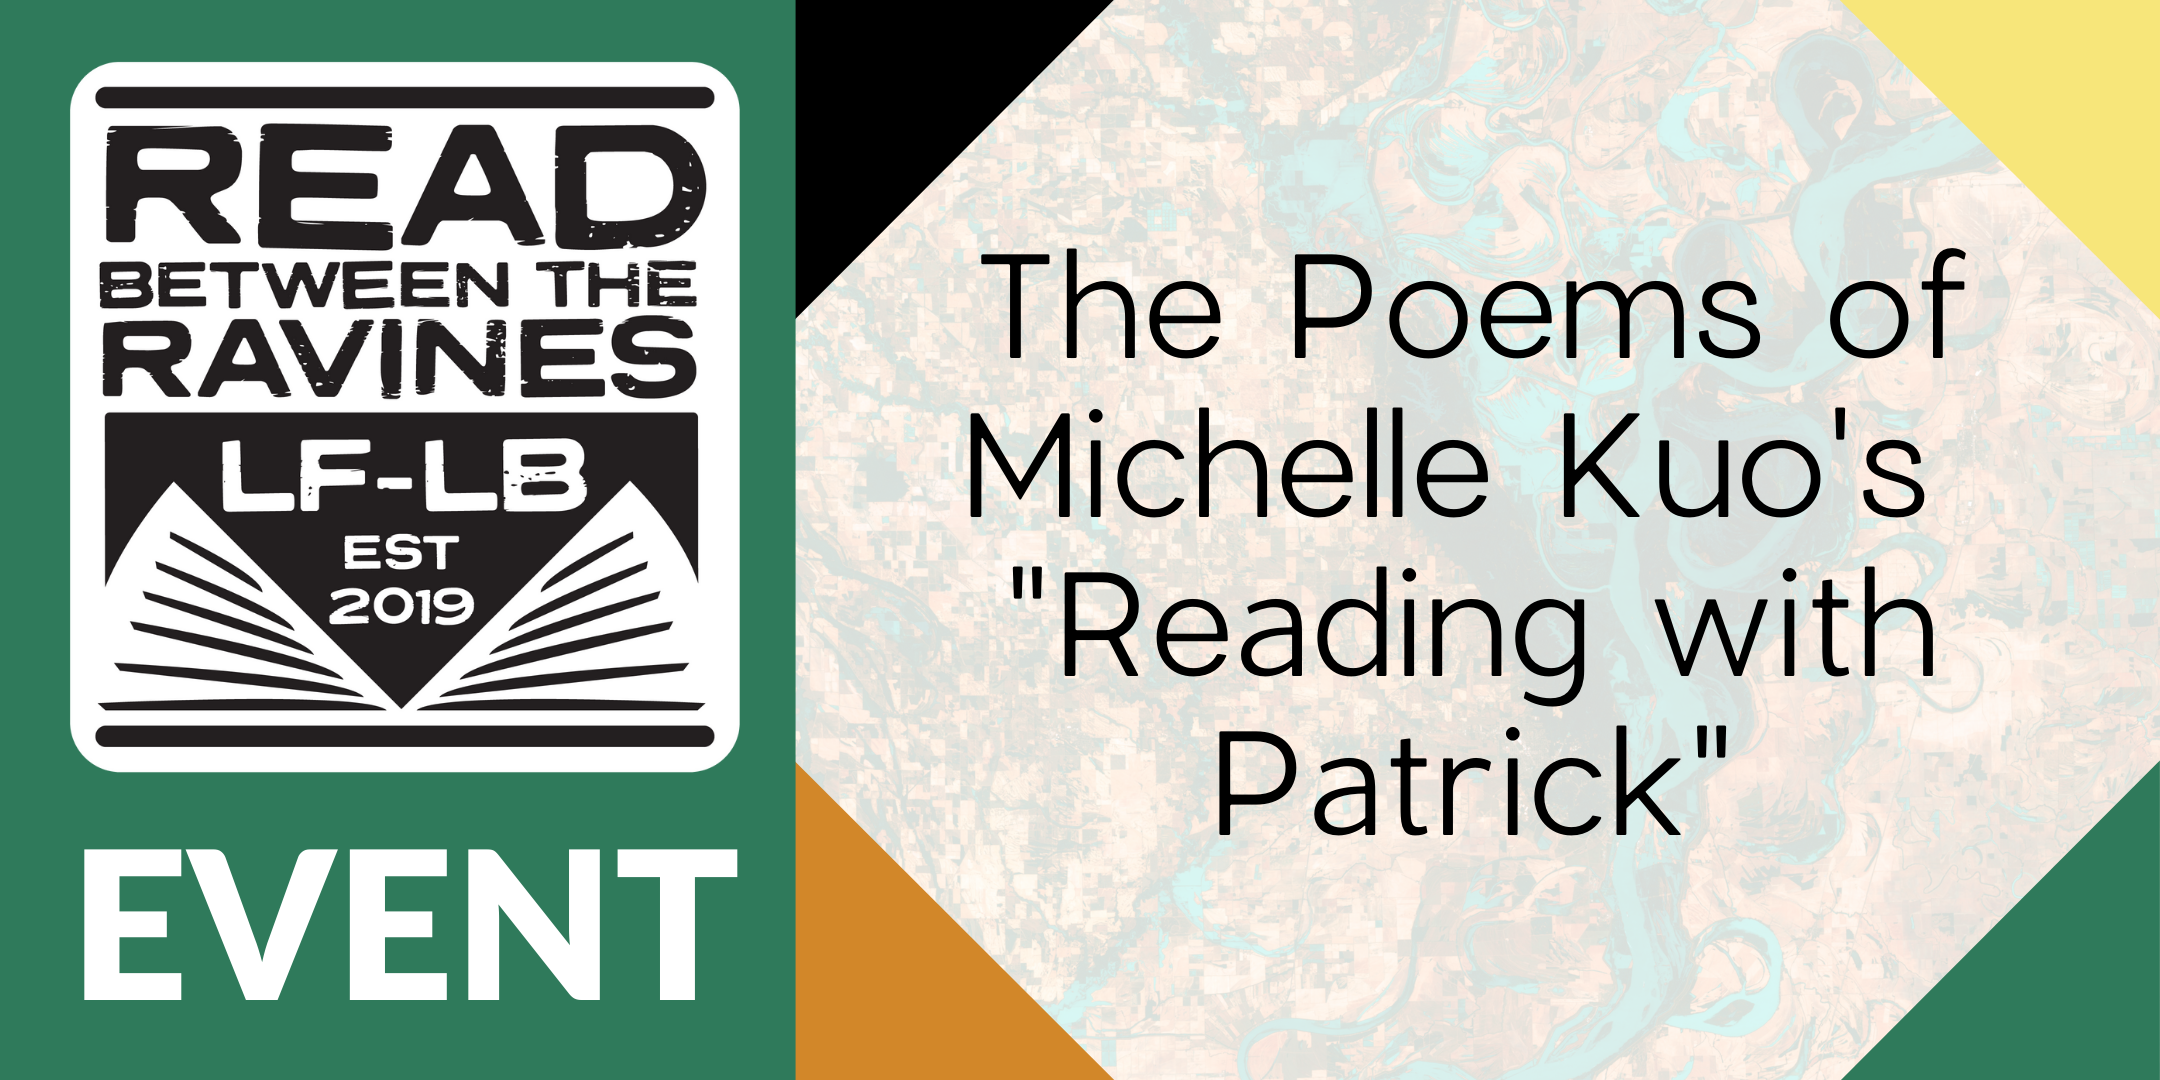 RBR Event: The Poems of Michelle Kuo's "Reading with Patrick" image